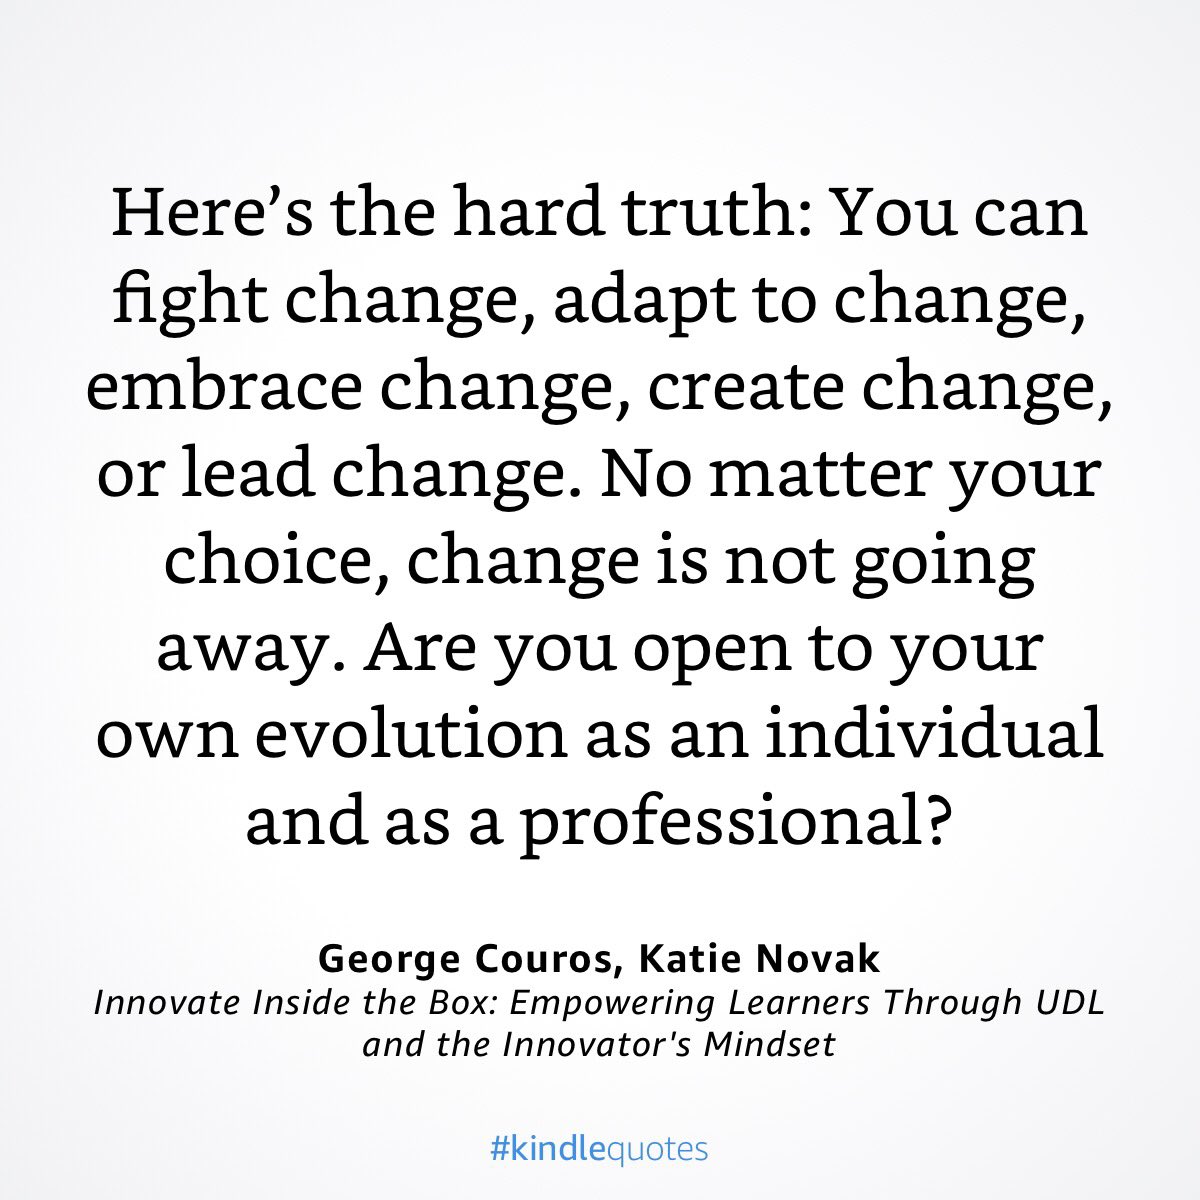 Here’s another pearl of wisdom #GeorgeCouros #InnovateInsideTheBox